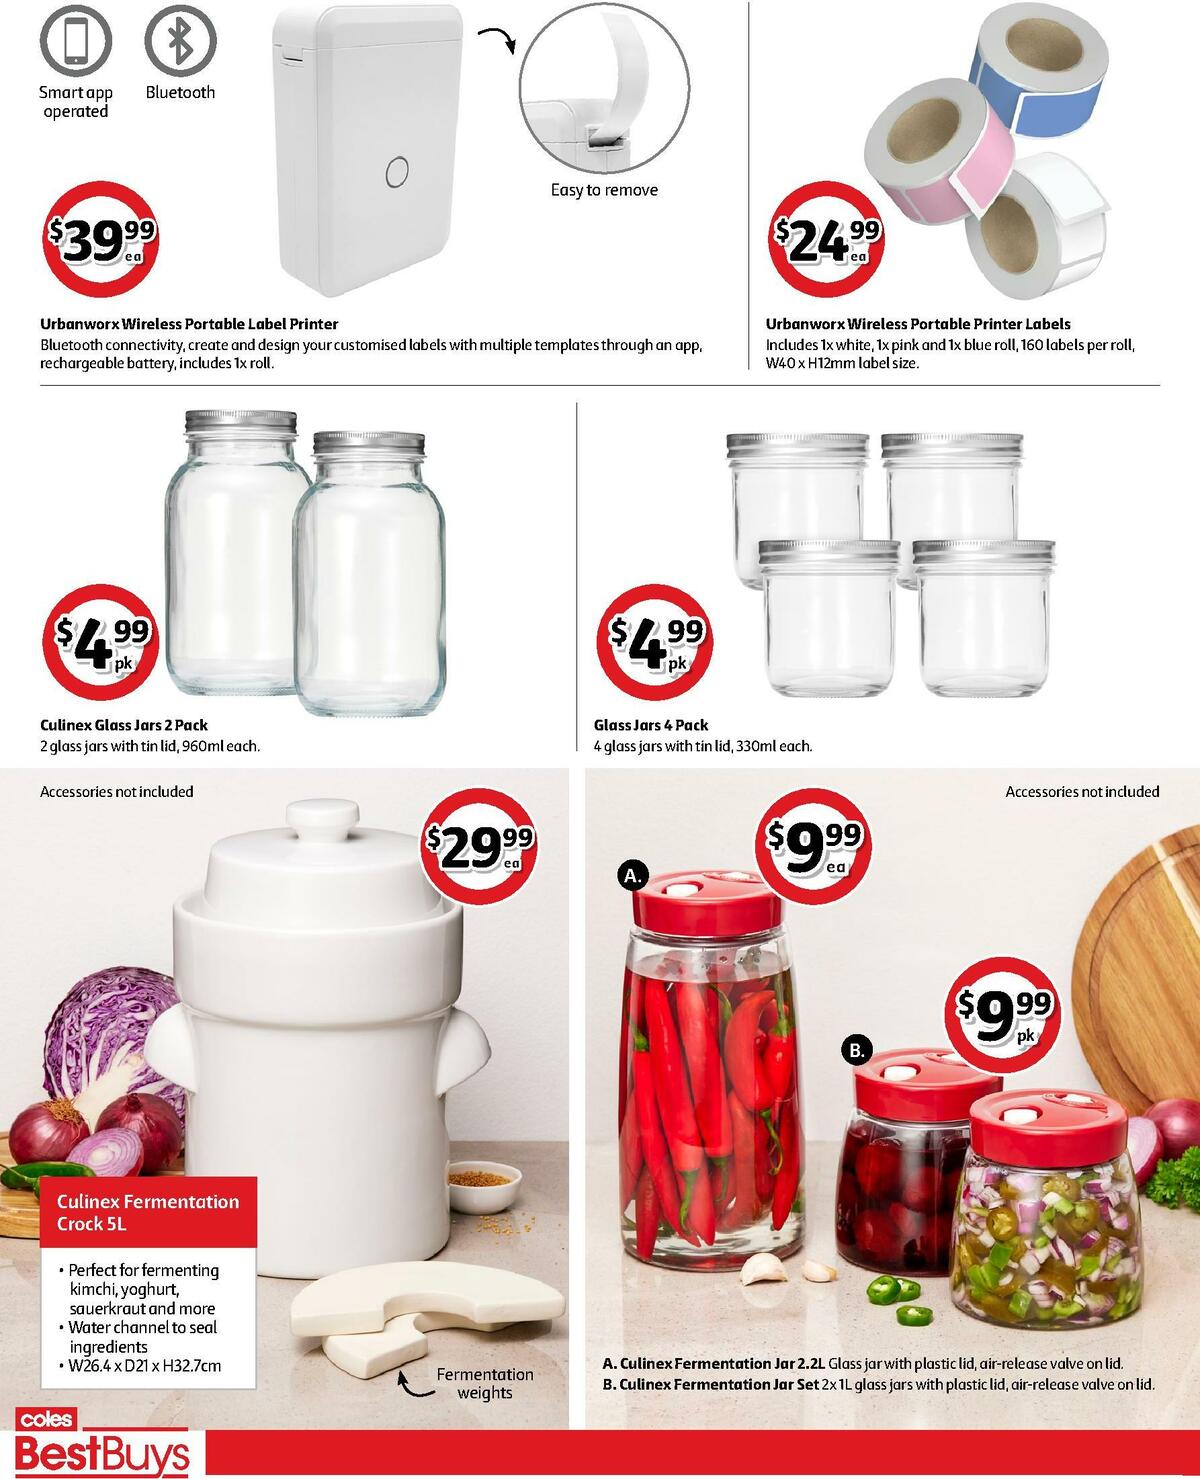 Coles Best Buys - Classic Kitchen Catalogues from 1 July